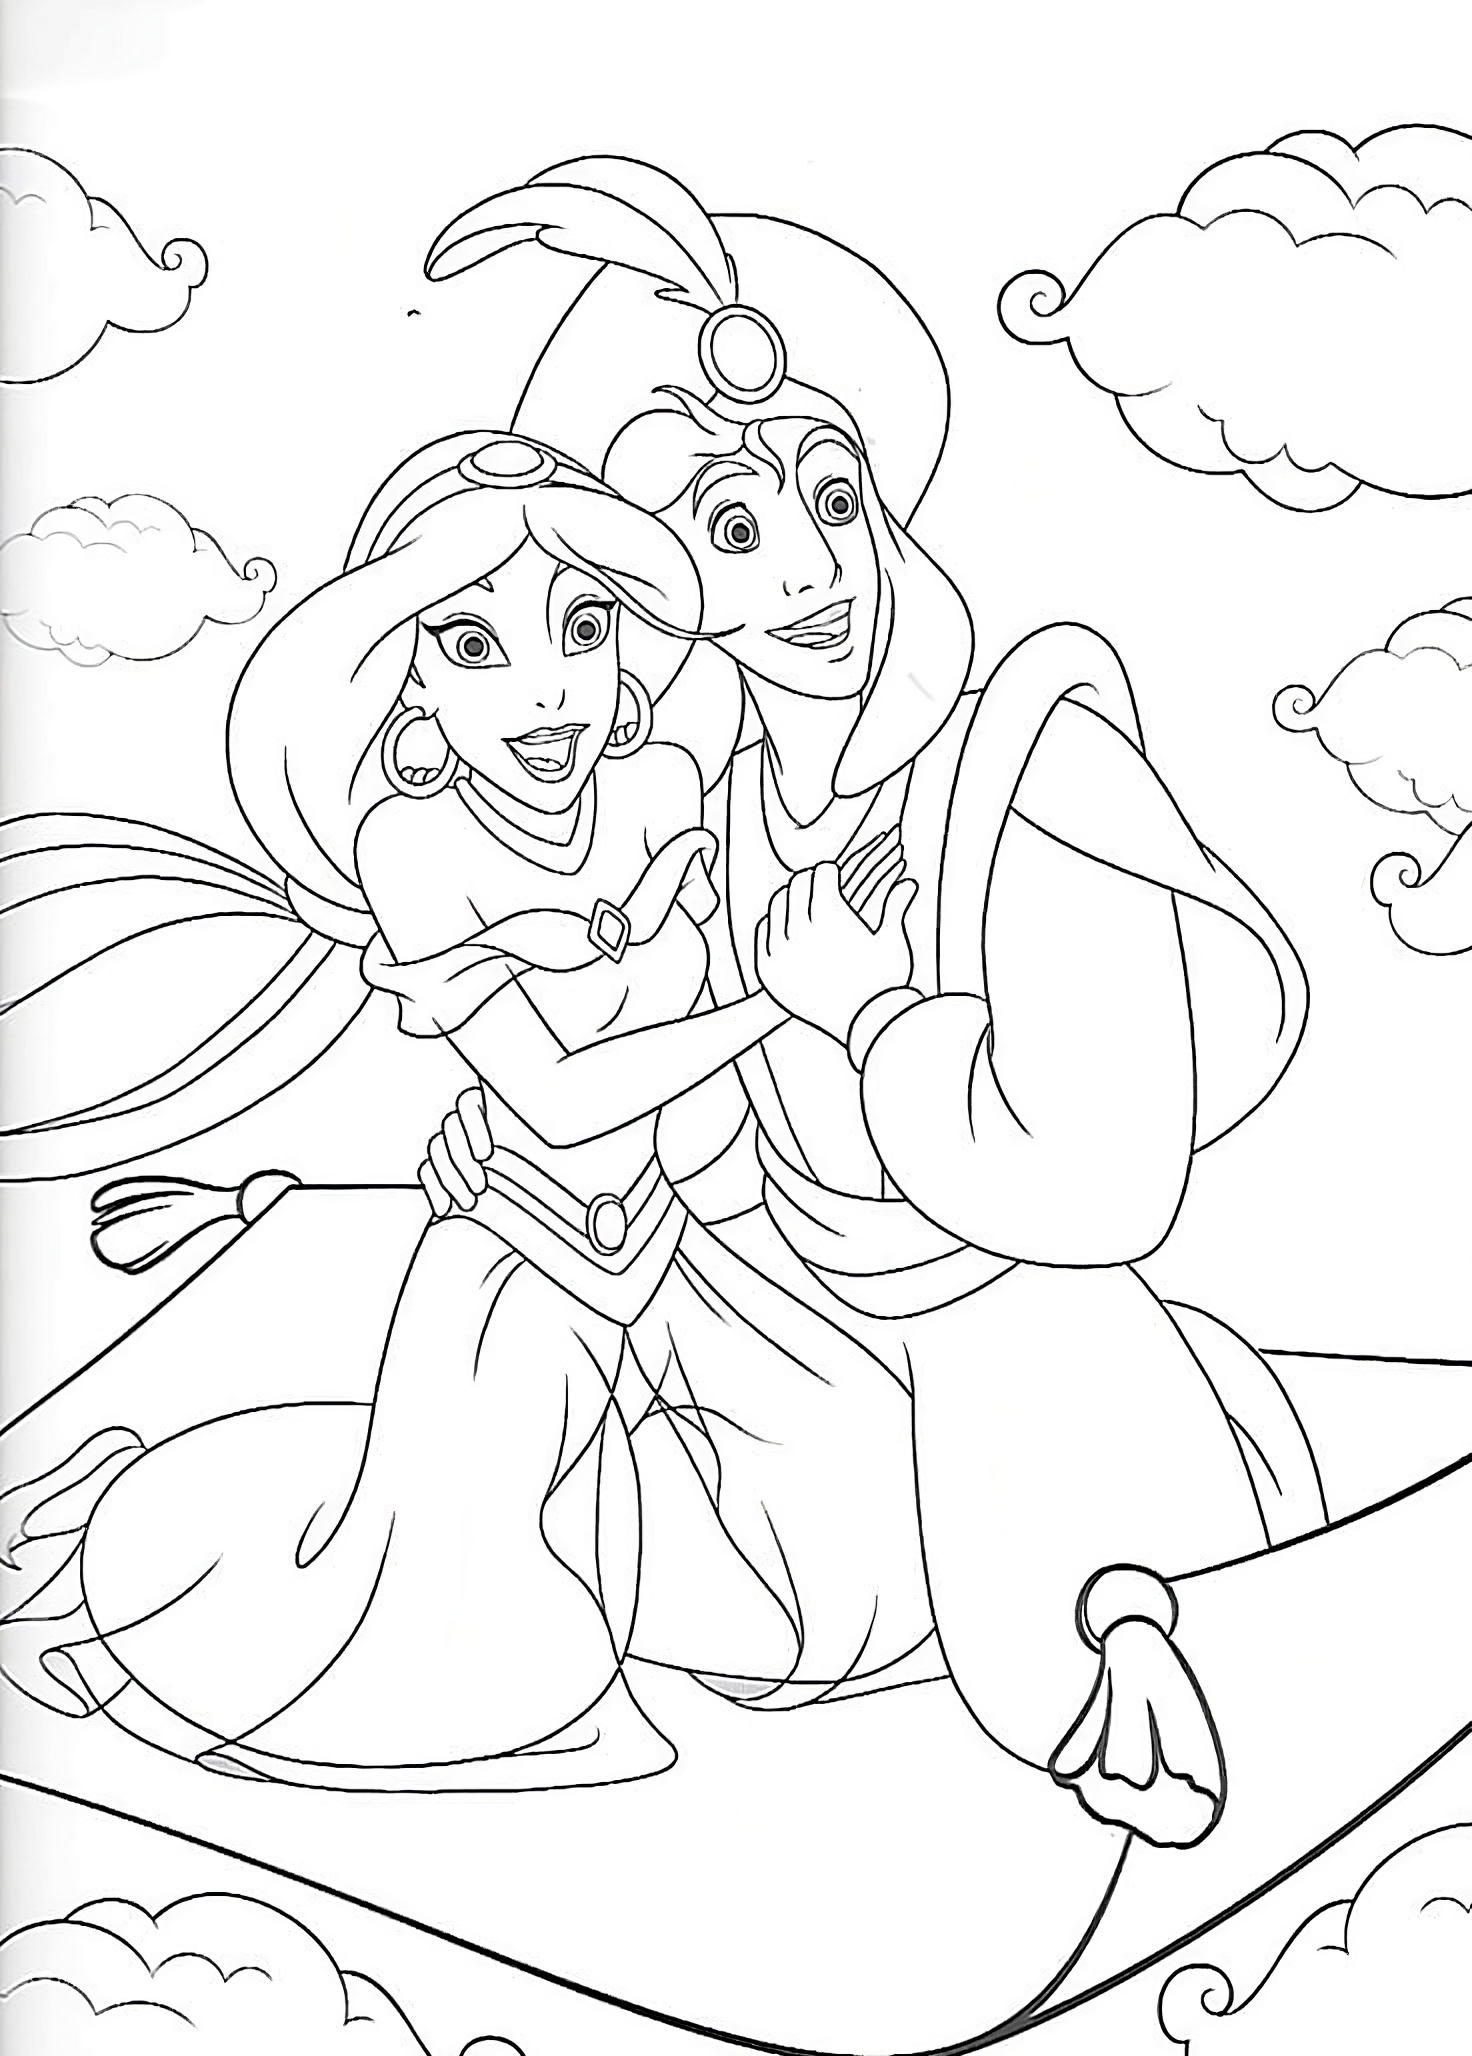 Jasmine 14  coloring page to print and coloring